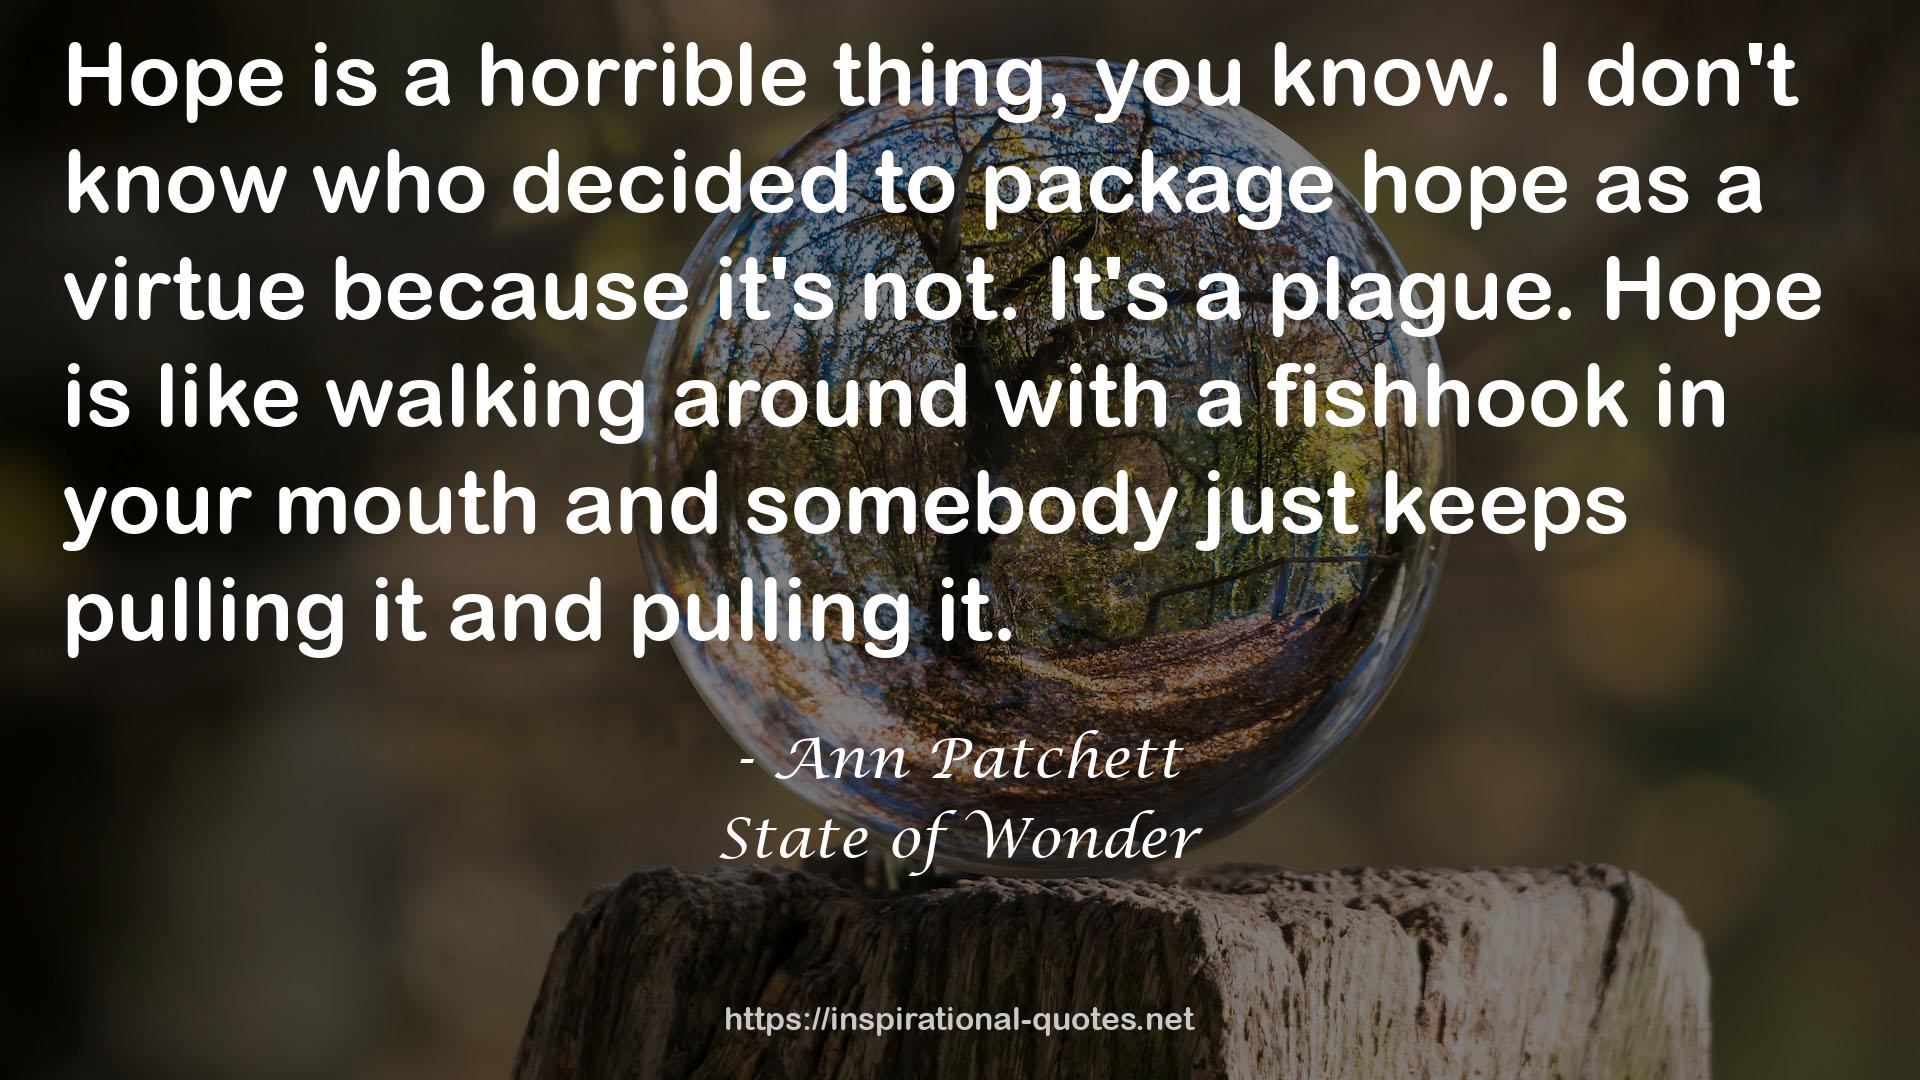 State of Wonder QUOTES